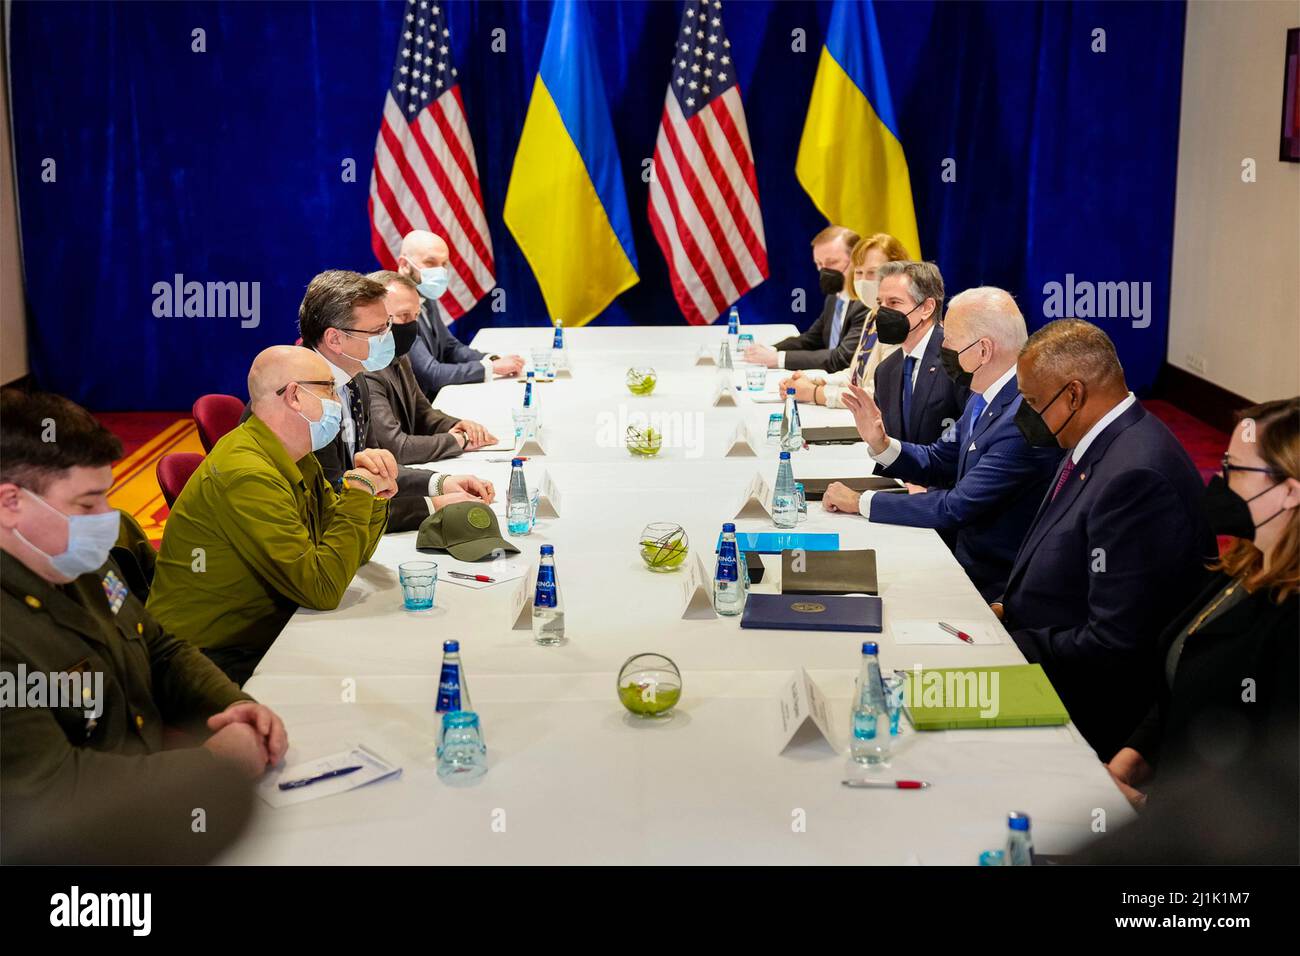 Warsaw, Poland. 26th Mar, 2022. U.S President Joe Biden, right, meets with Ukrainian Foreign Minister Dmytro Kuleba and Minister of Defense Oleksii Reznikov, left, to discuss increasing military and humanitarian assistance for Ukraine, March 26, 2022 in Warsaw, Poland. Credit: Adam Schultz/White House Photo/Alamy Live News Stock Photo